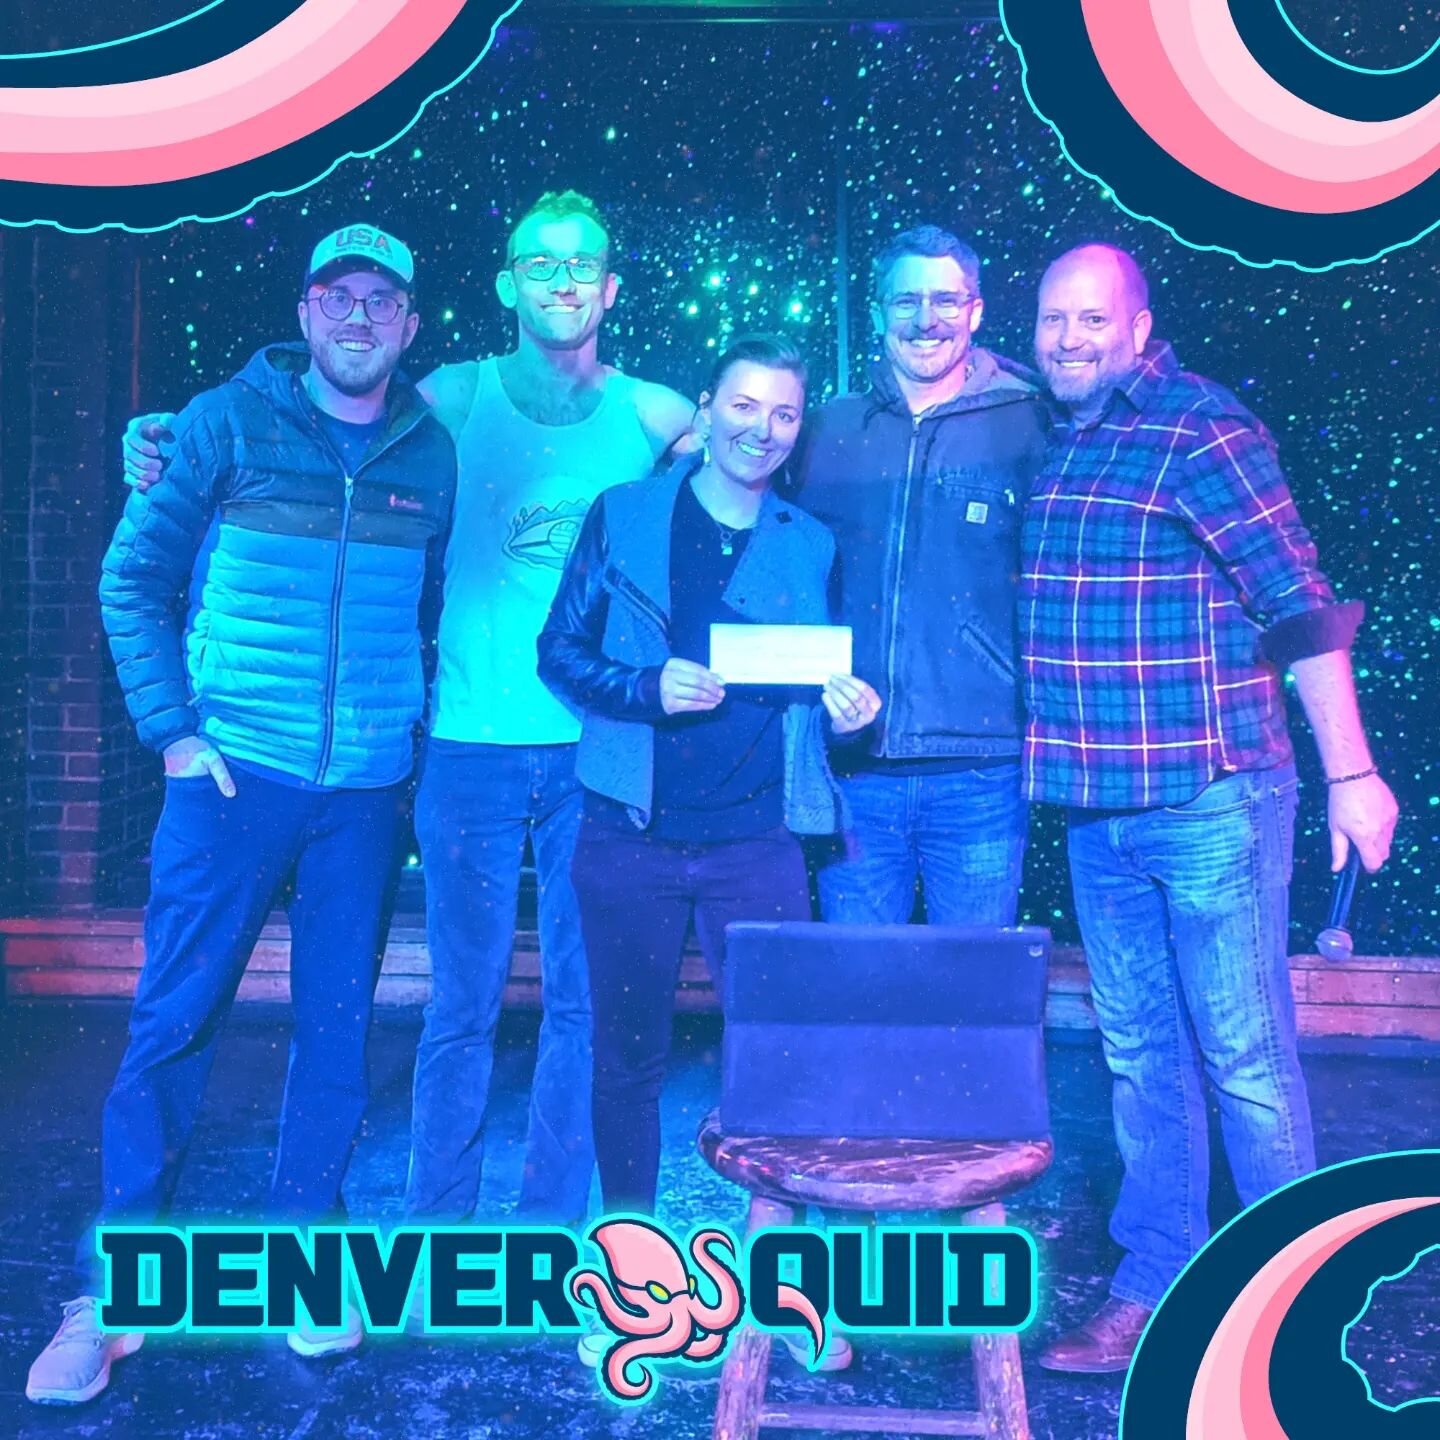 We are excited to announce a donation to @onecolorado from Denver Squid / Rocky Mountain Oyster Festival! 

One Colorado is an awesome organization that supports fellow LGBTQ Coloradans and their Families! Go give them a follow 🦑🌈